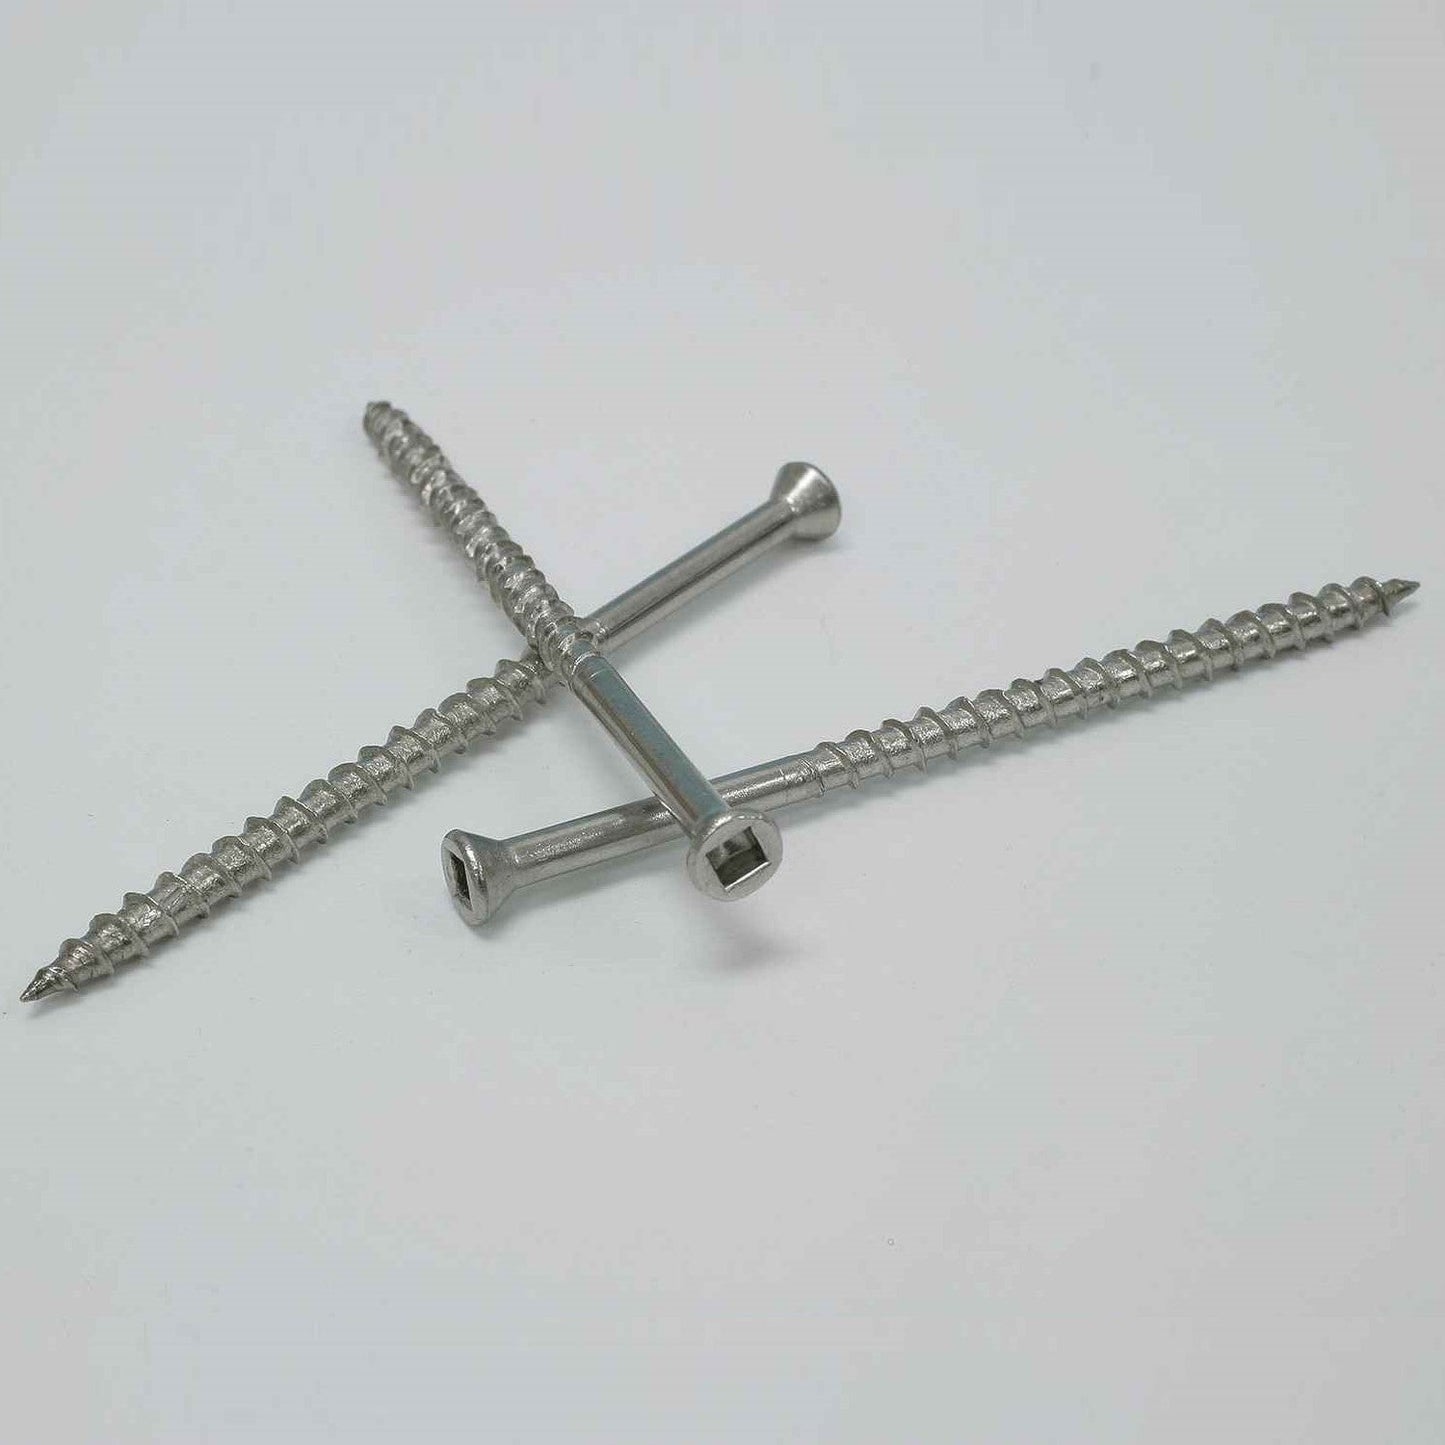 Trim Head Wood Screws - 305 Stainless Steel - Square Drive Shown